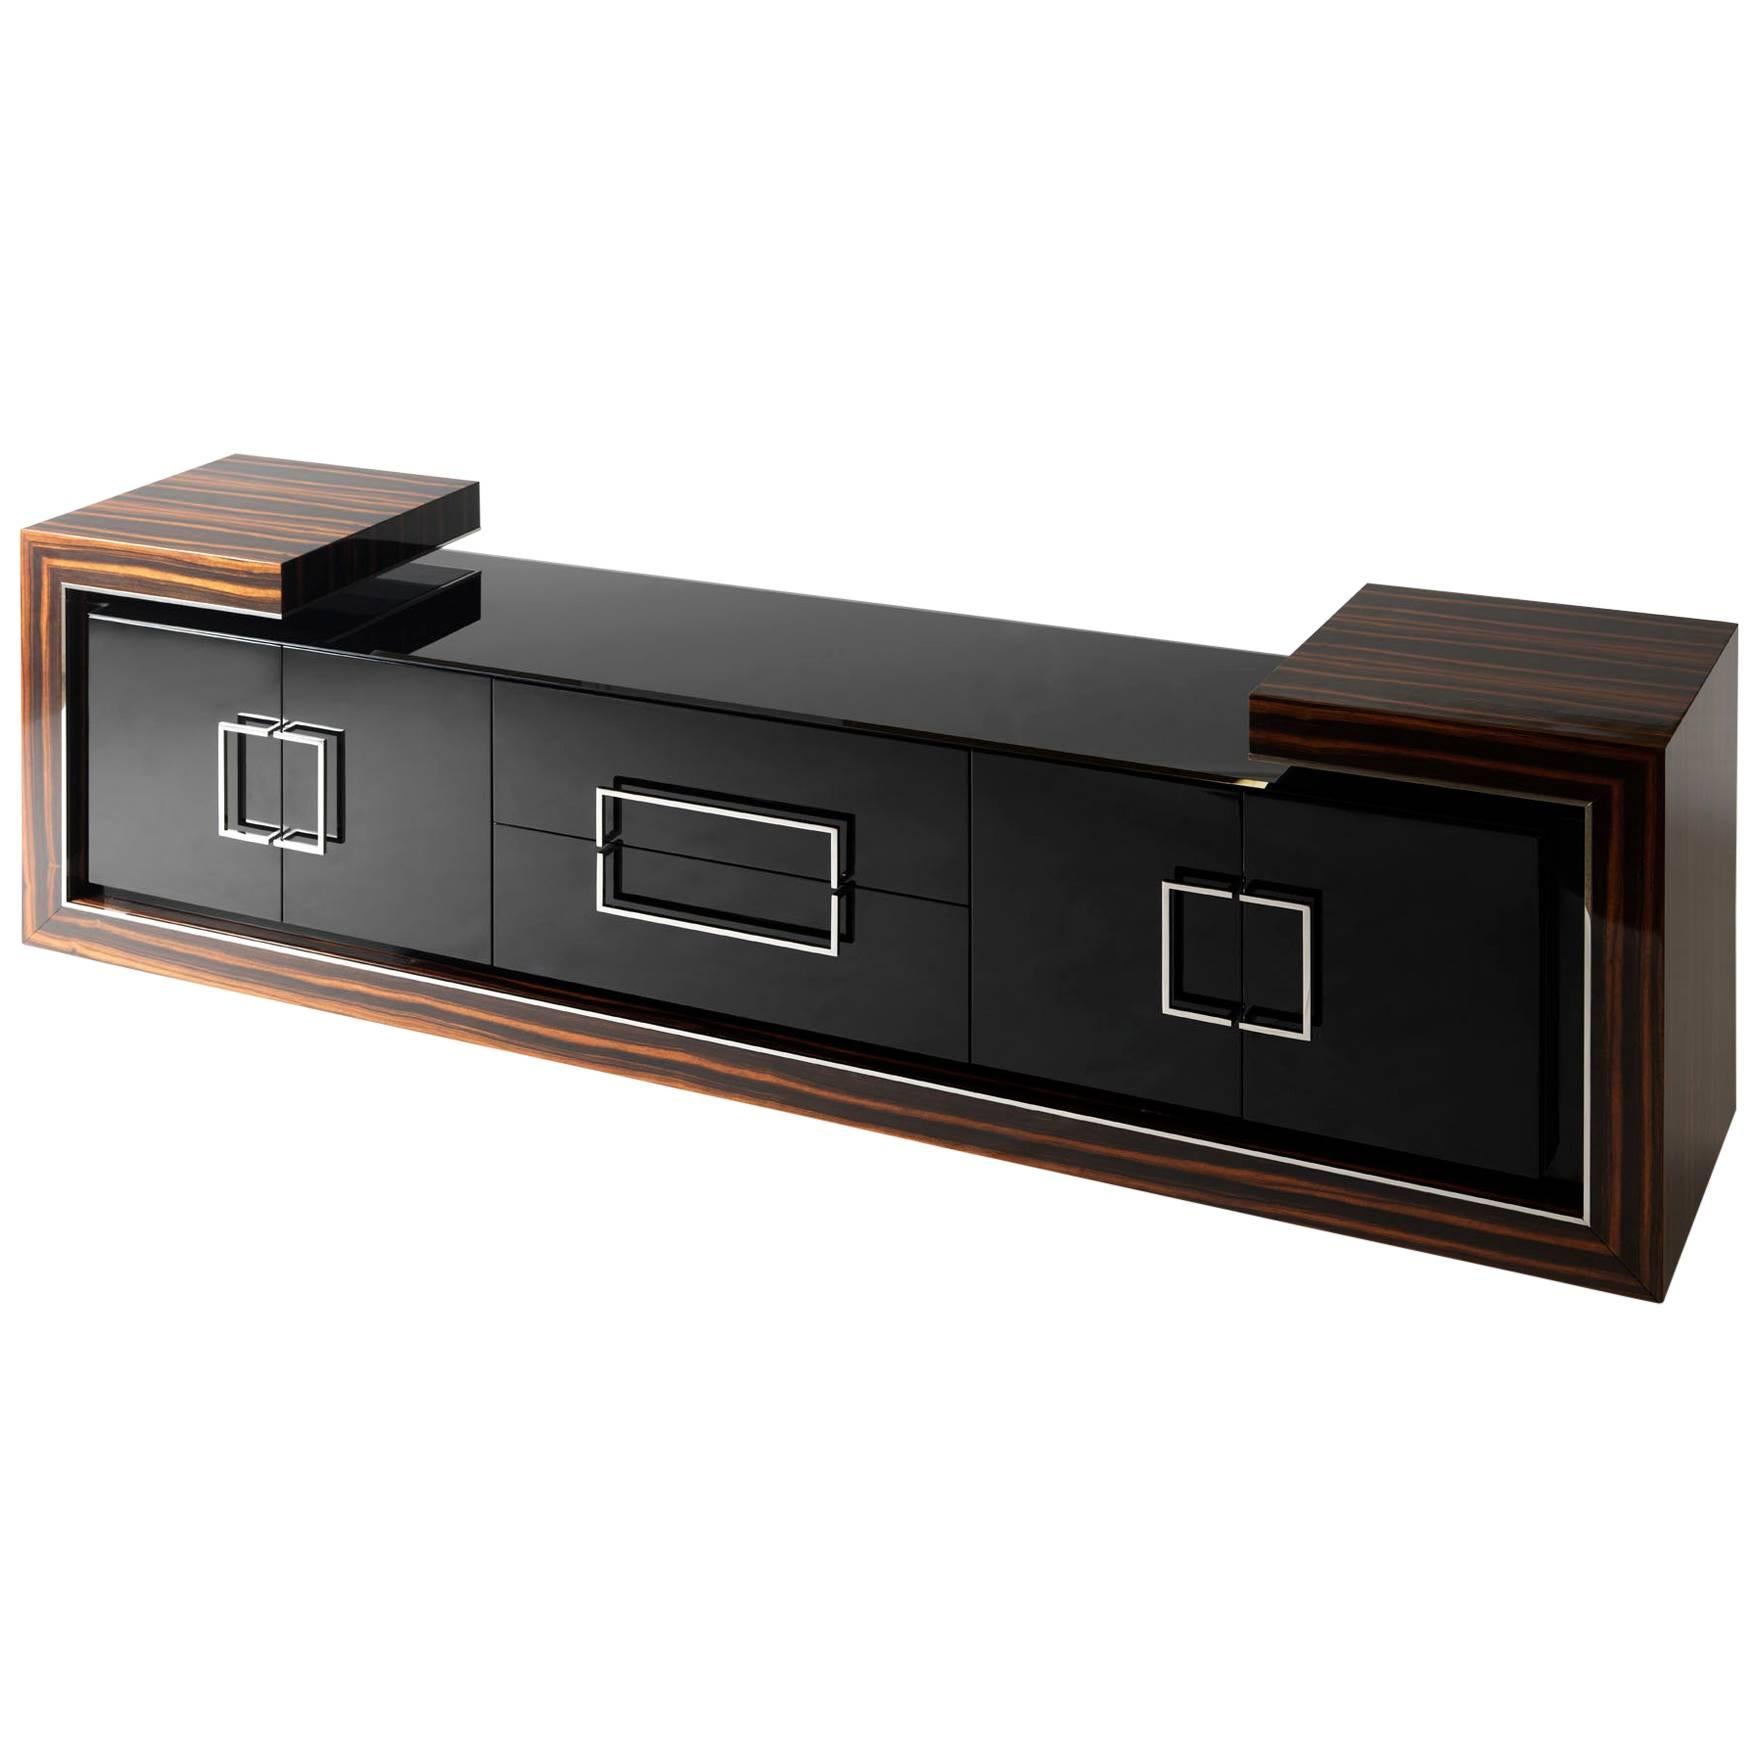 Macassar Ebony Sideboard with high gloss natural color finish, Handmade in Italy For Sale